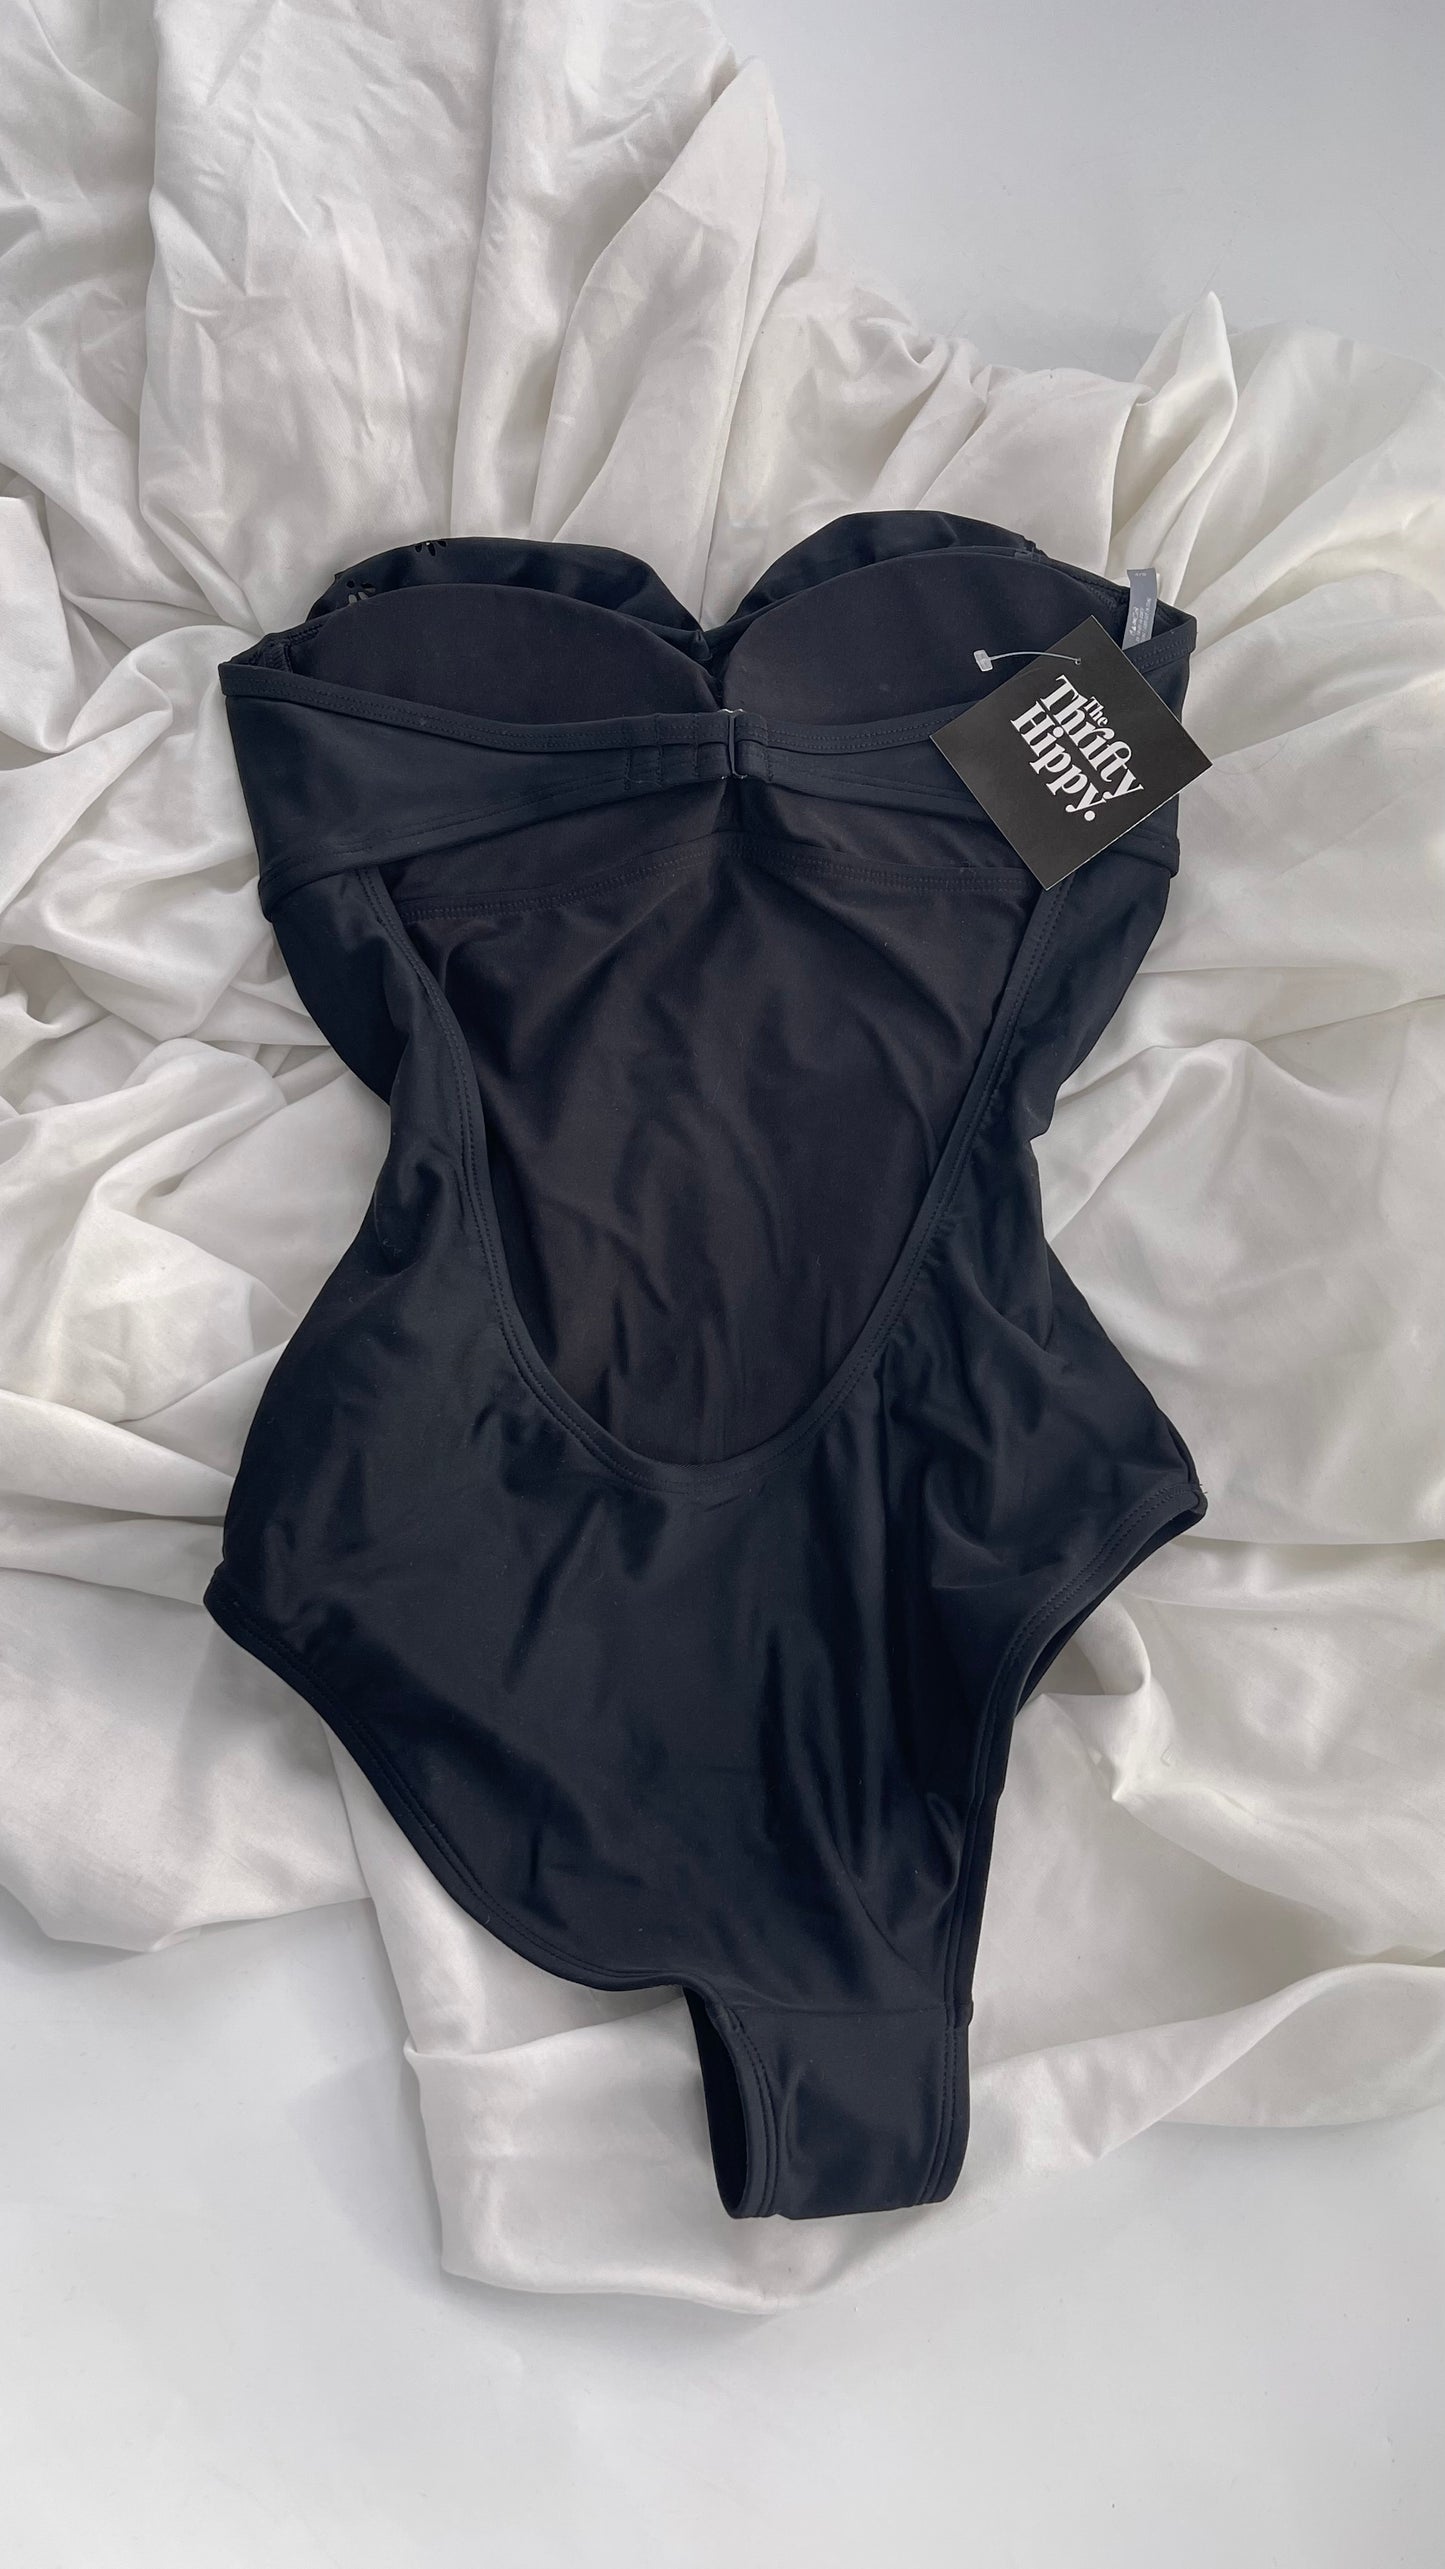 AERIE Black Swimsuit with Ruffled Sweetheart Neckline and Open Back (Small)